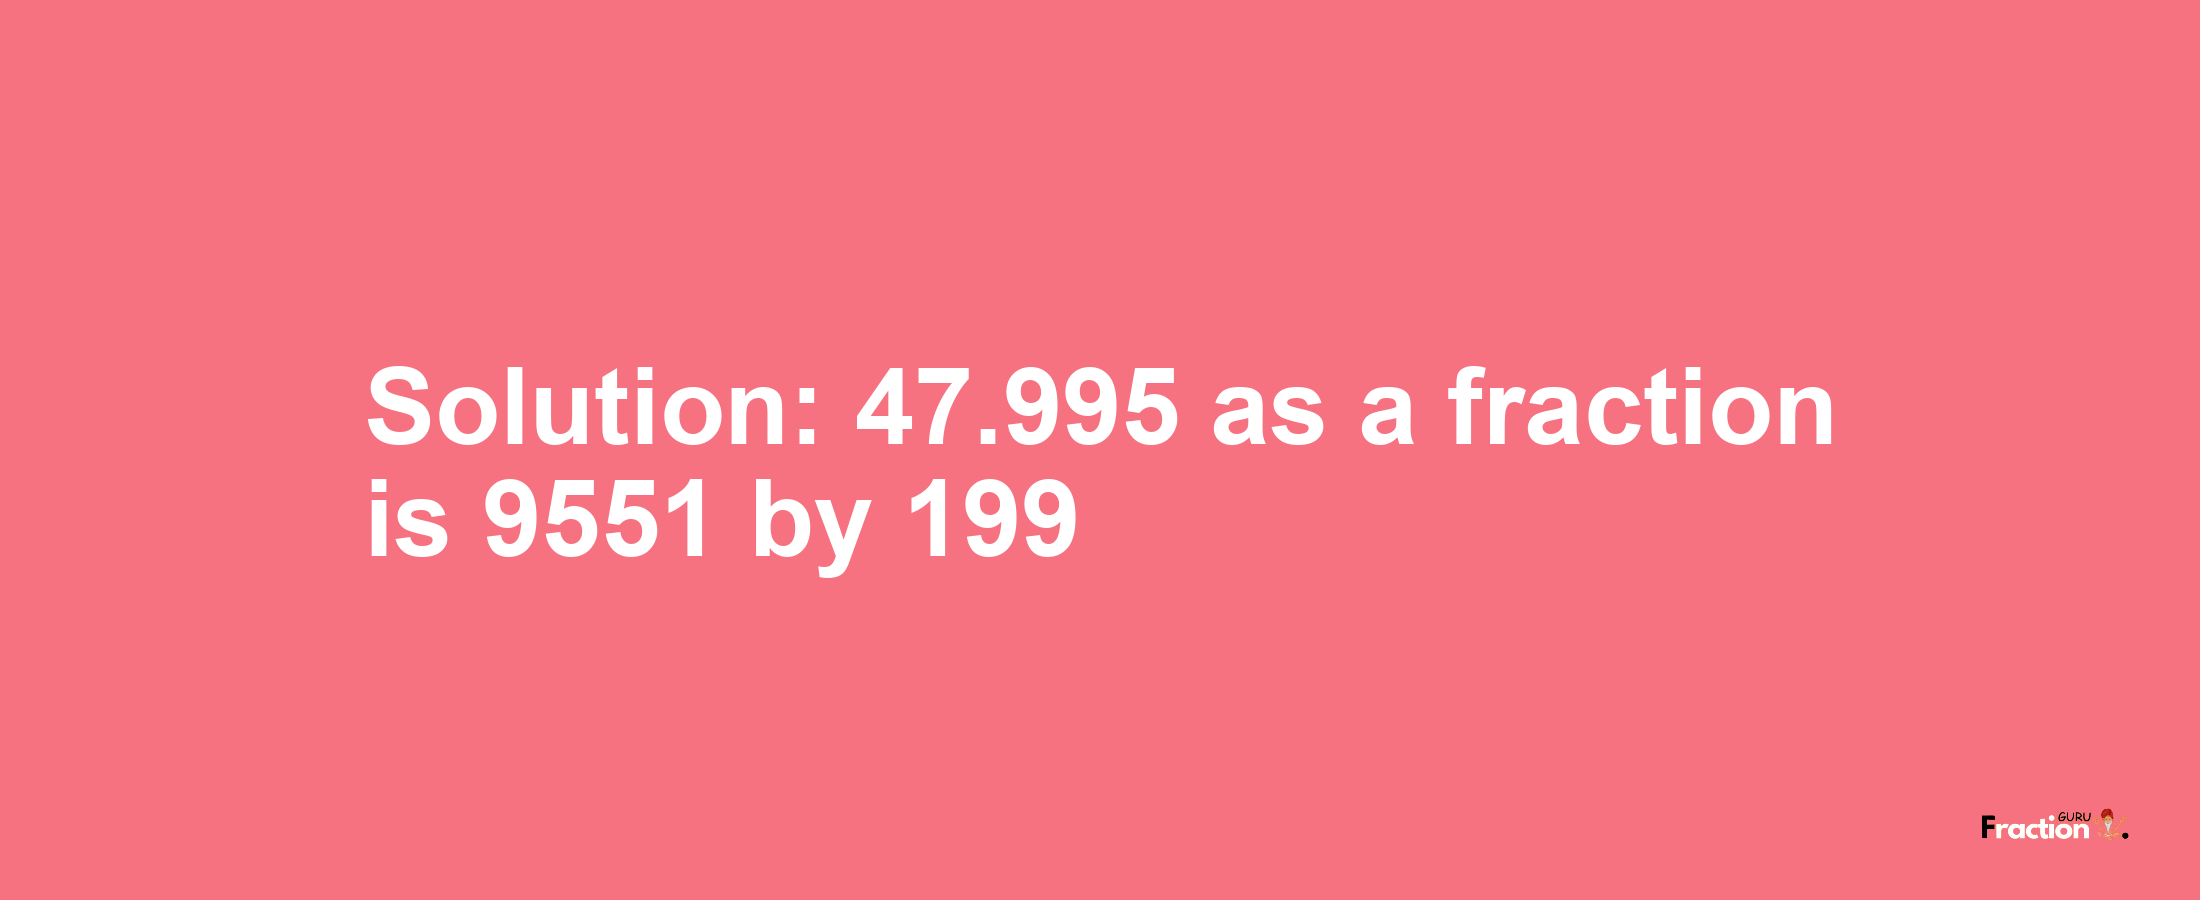 Solution:47.995 as a fraction is 9551/199